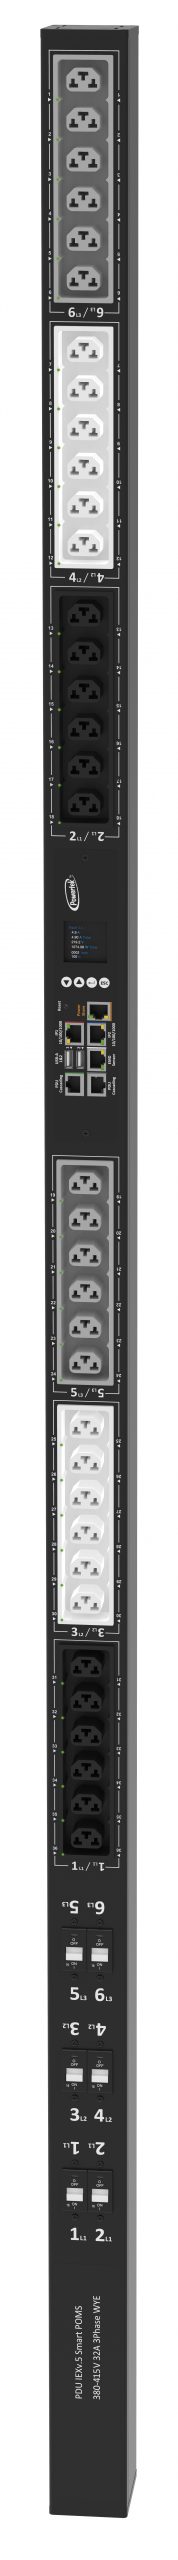 IPDU Per Outlet Monitored & Switched Metered Intelligent Power Distribution Unit with remote internet access for information and on/off switching per outlet